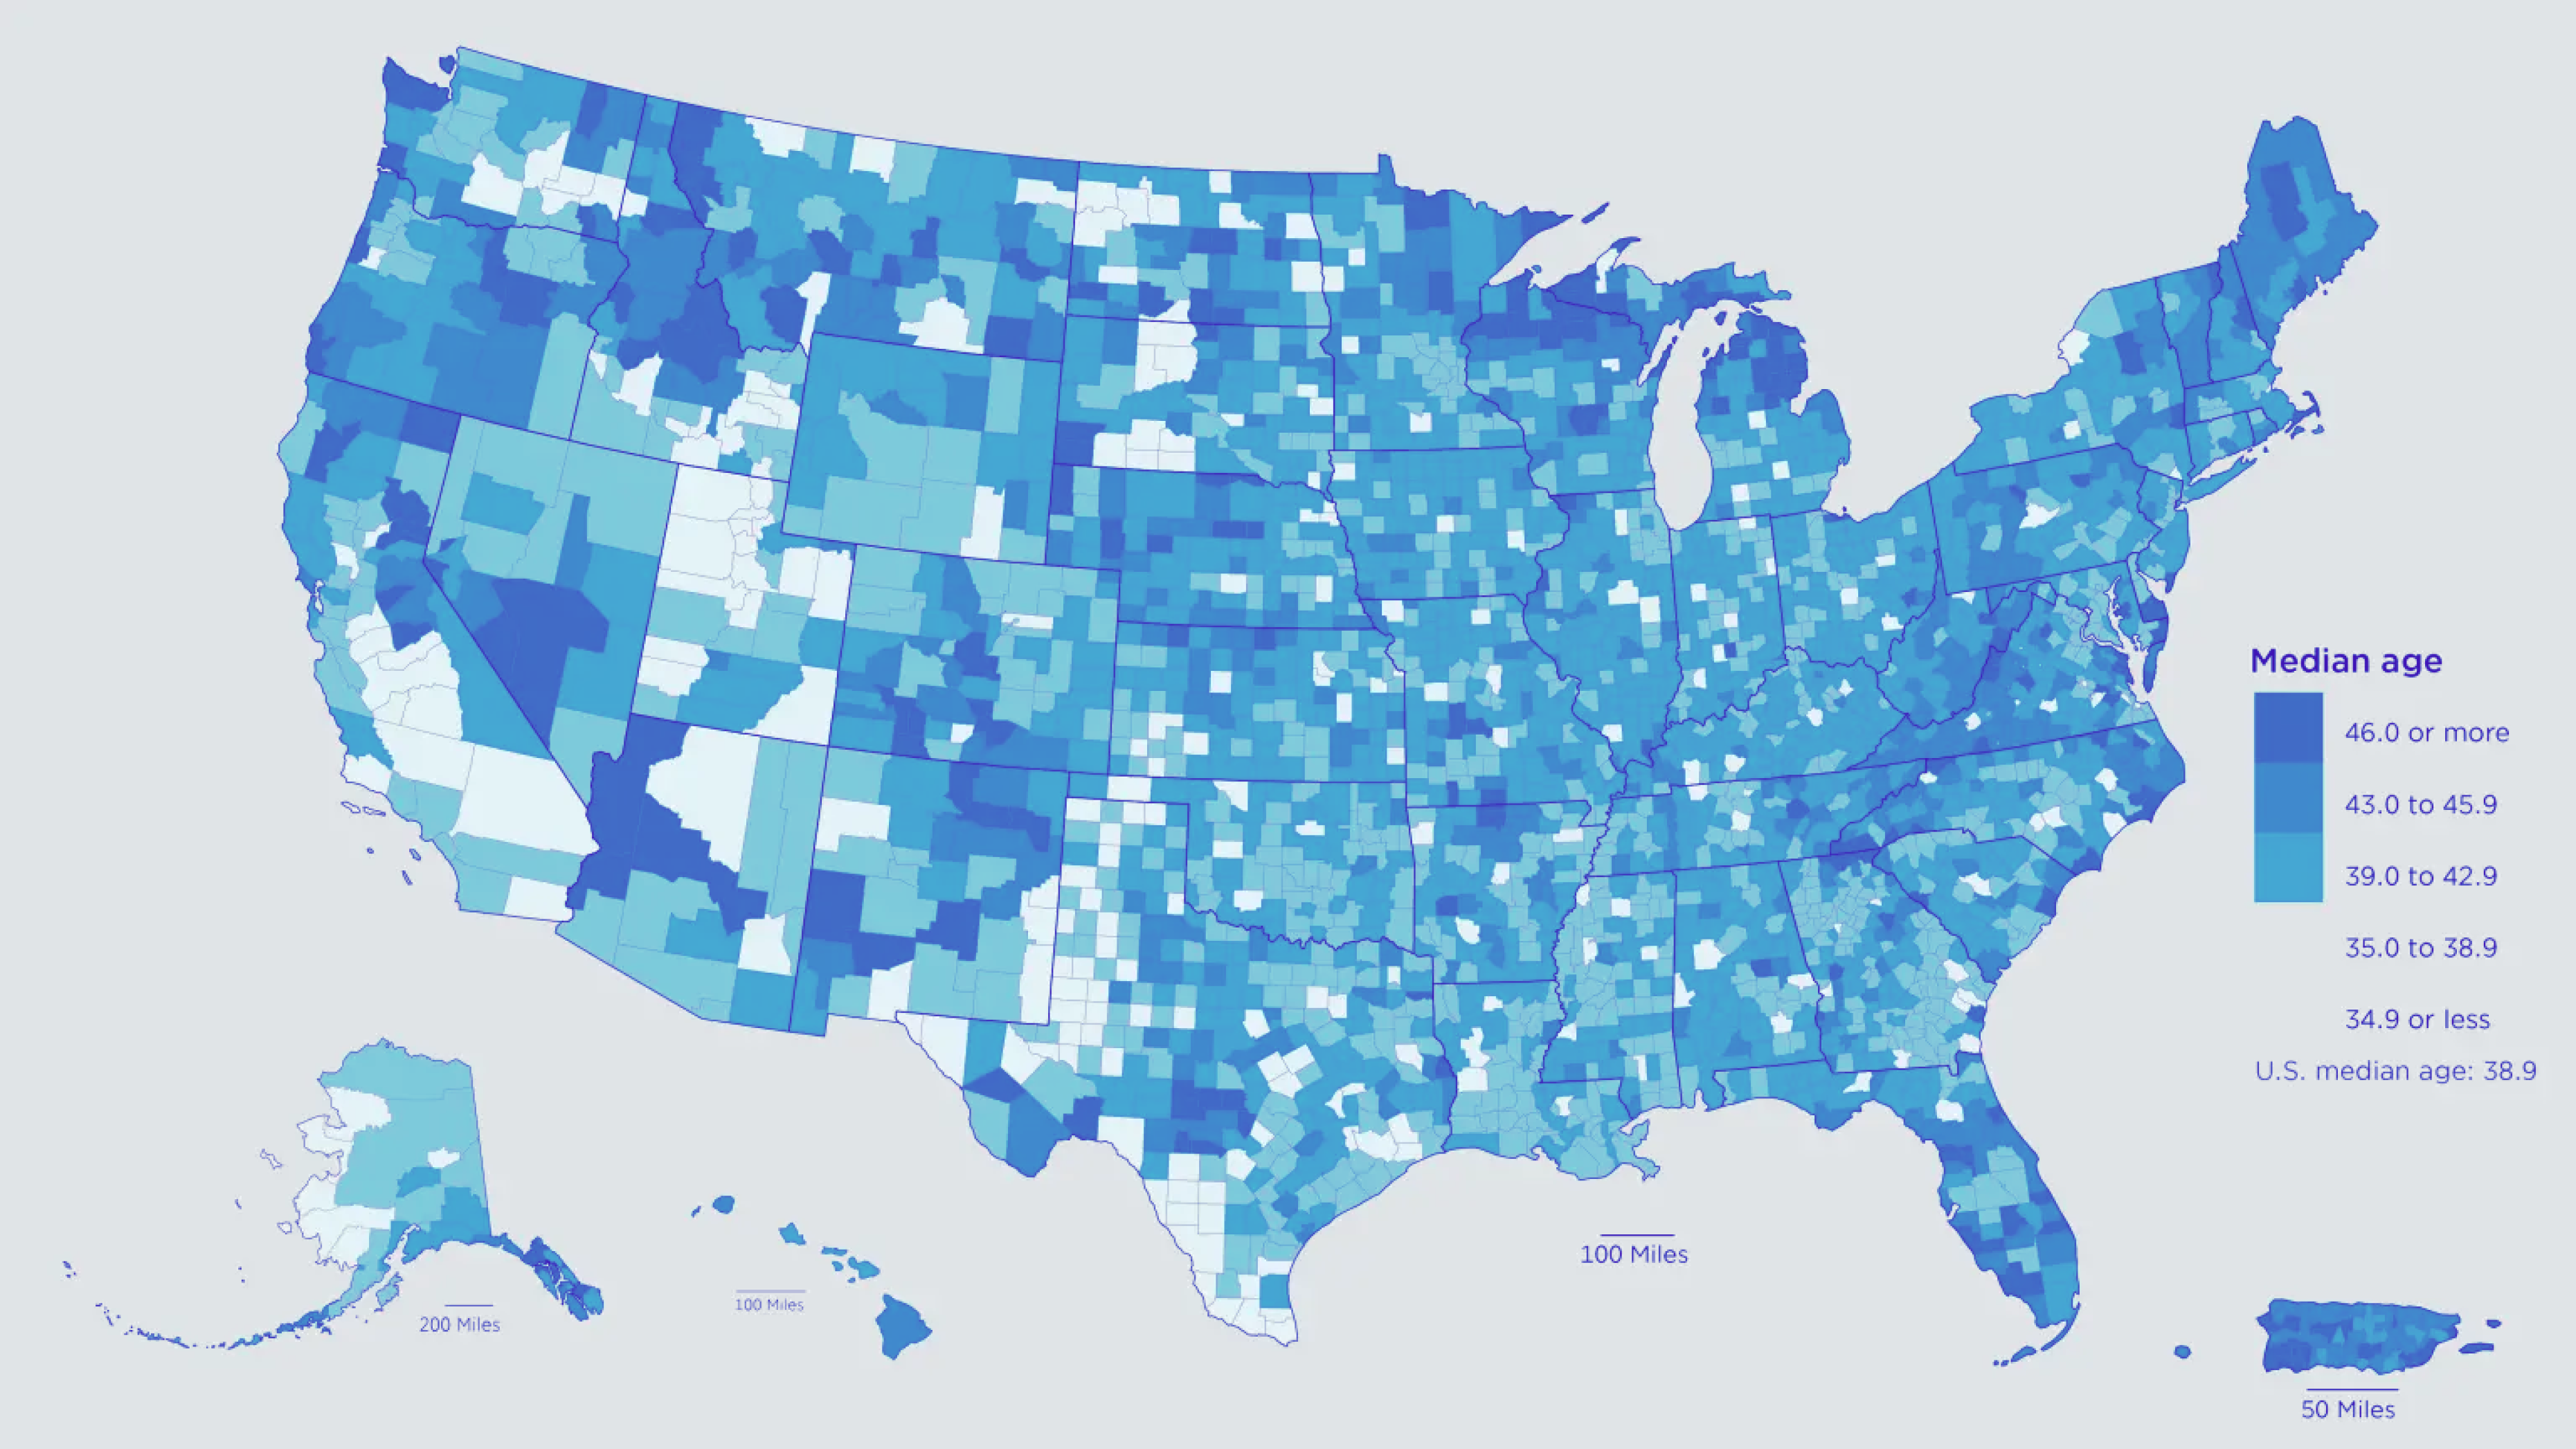 A choropleth map of the united states displaying median age by county with a color gradient from light to dark blue indicating increasing age ranges following a natural bell curve distribution.